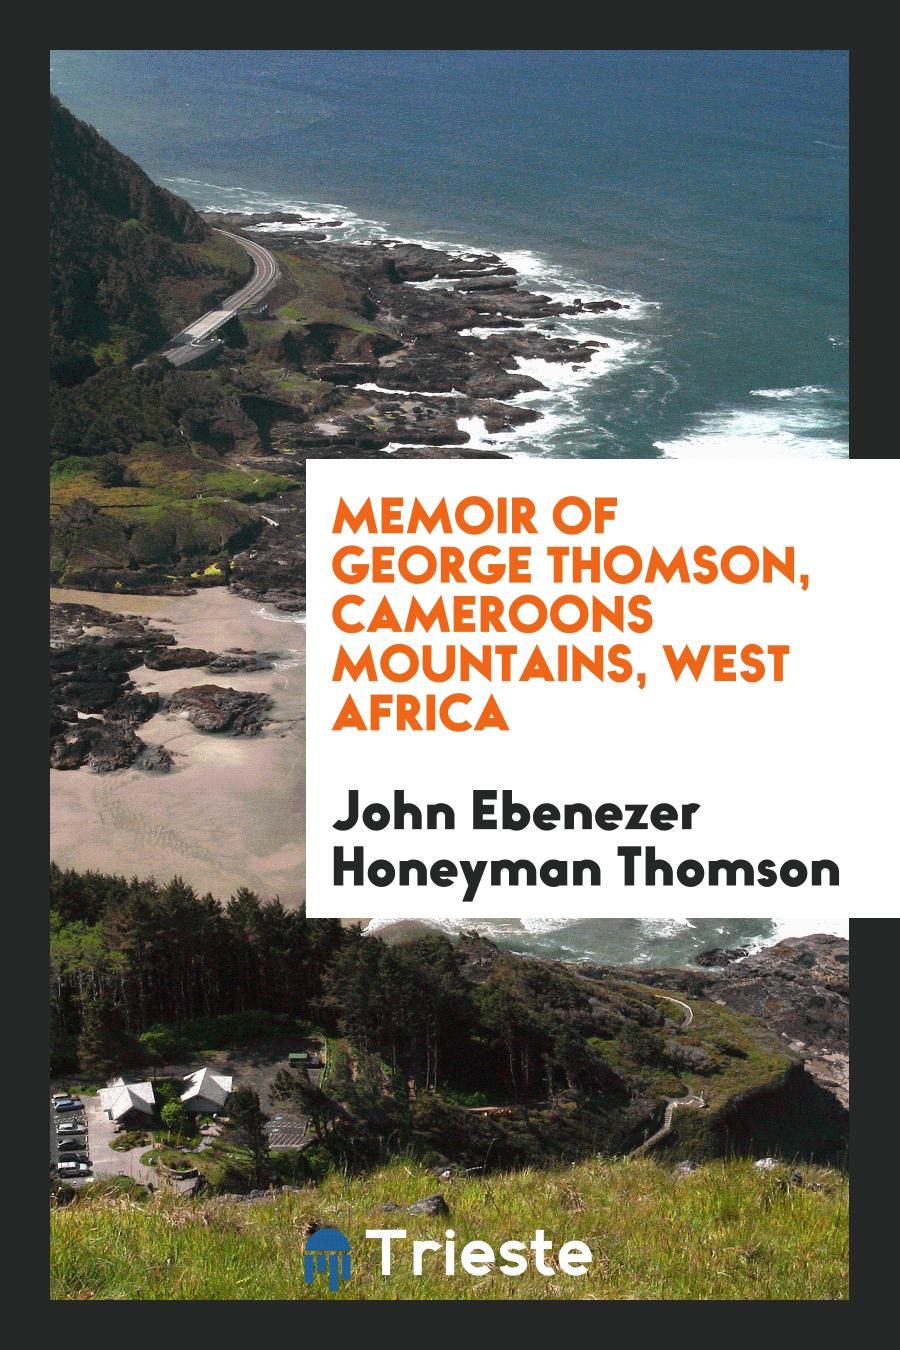 Memoir of George Thomson, Cameroons Mountains, West Africa